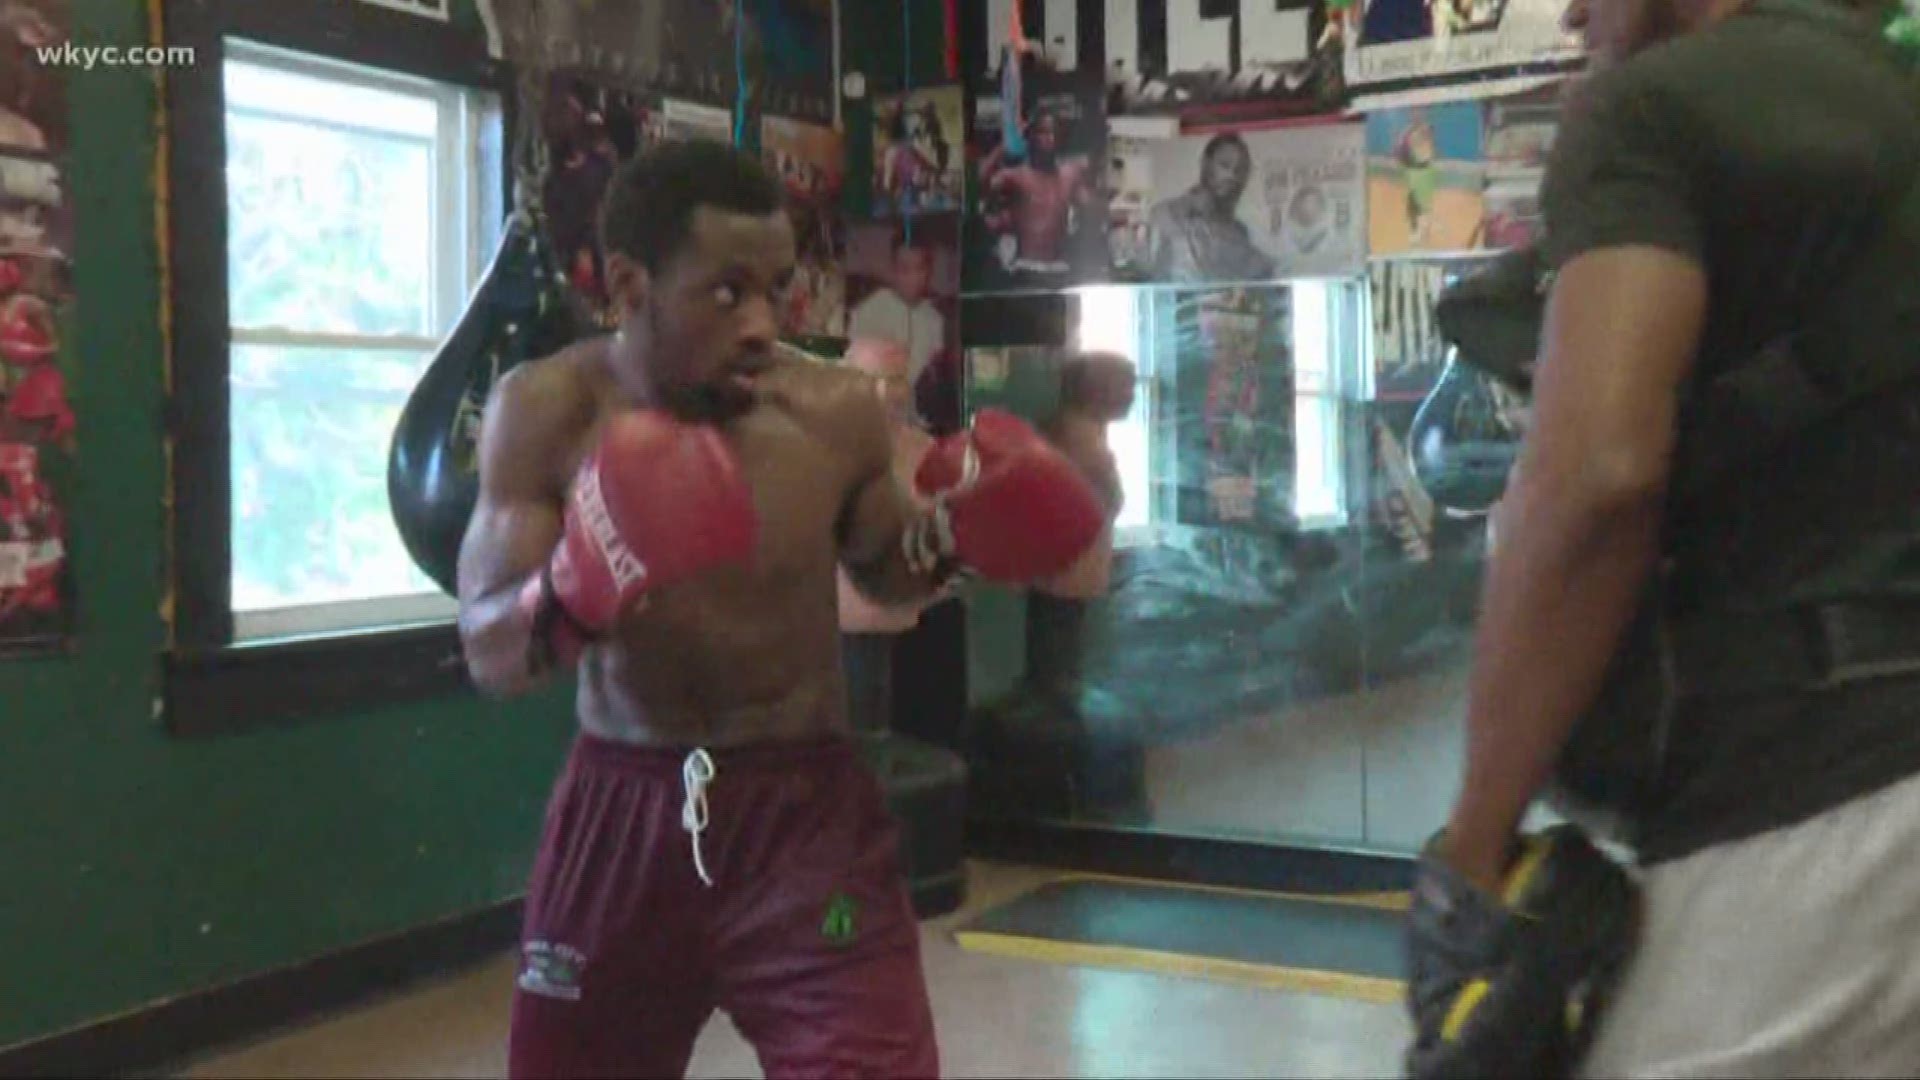 Cleveland Heights native Charles "Bad News" Conwell will fight for the USBA Junior Middleweight Championship in New York this weekend.